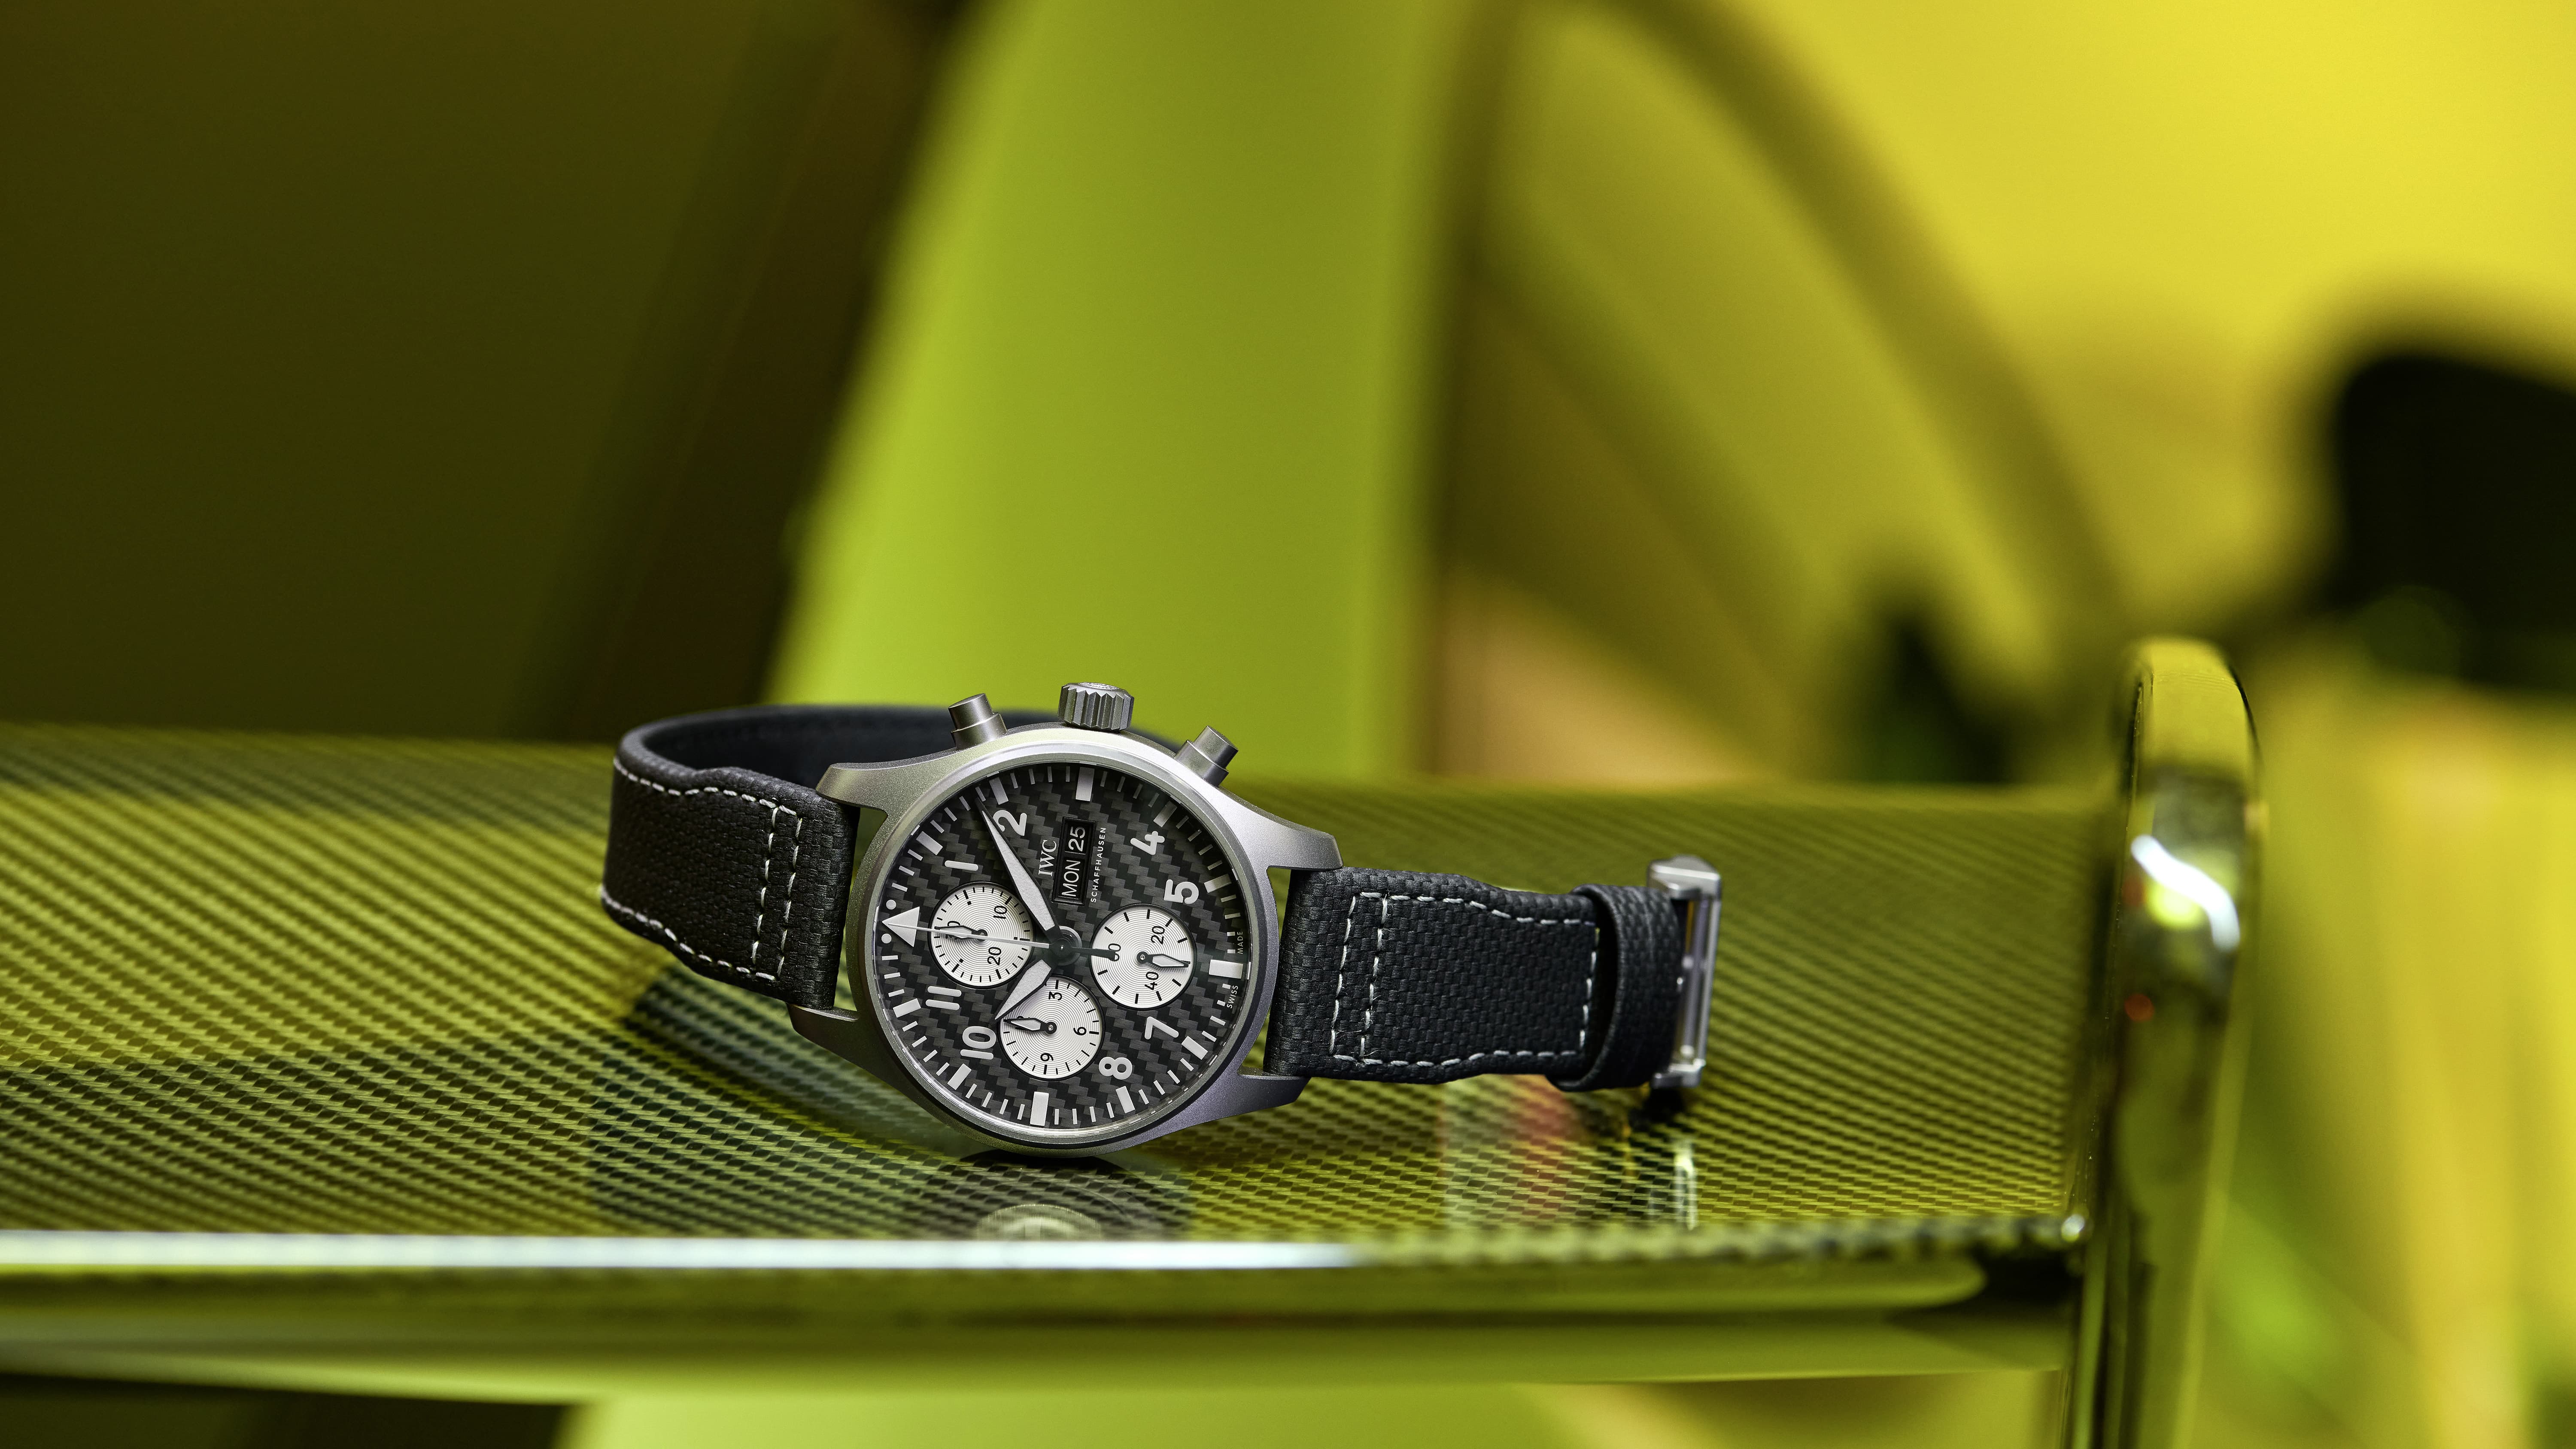 IWC Schaffhausen and long-standing partner Mercedes-AMG launch a performance engineering inspired chronograph